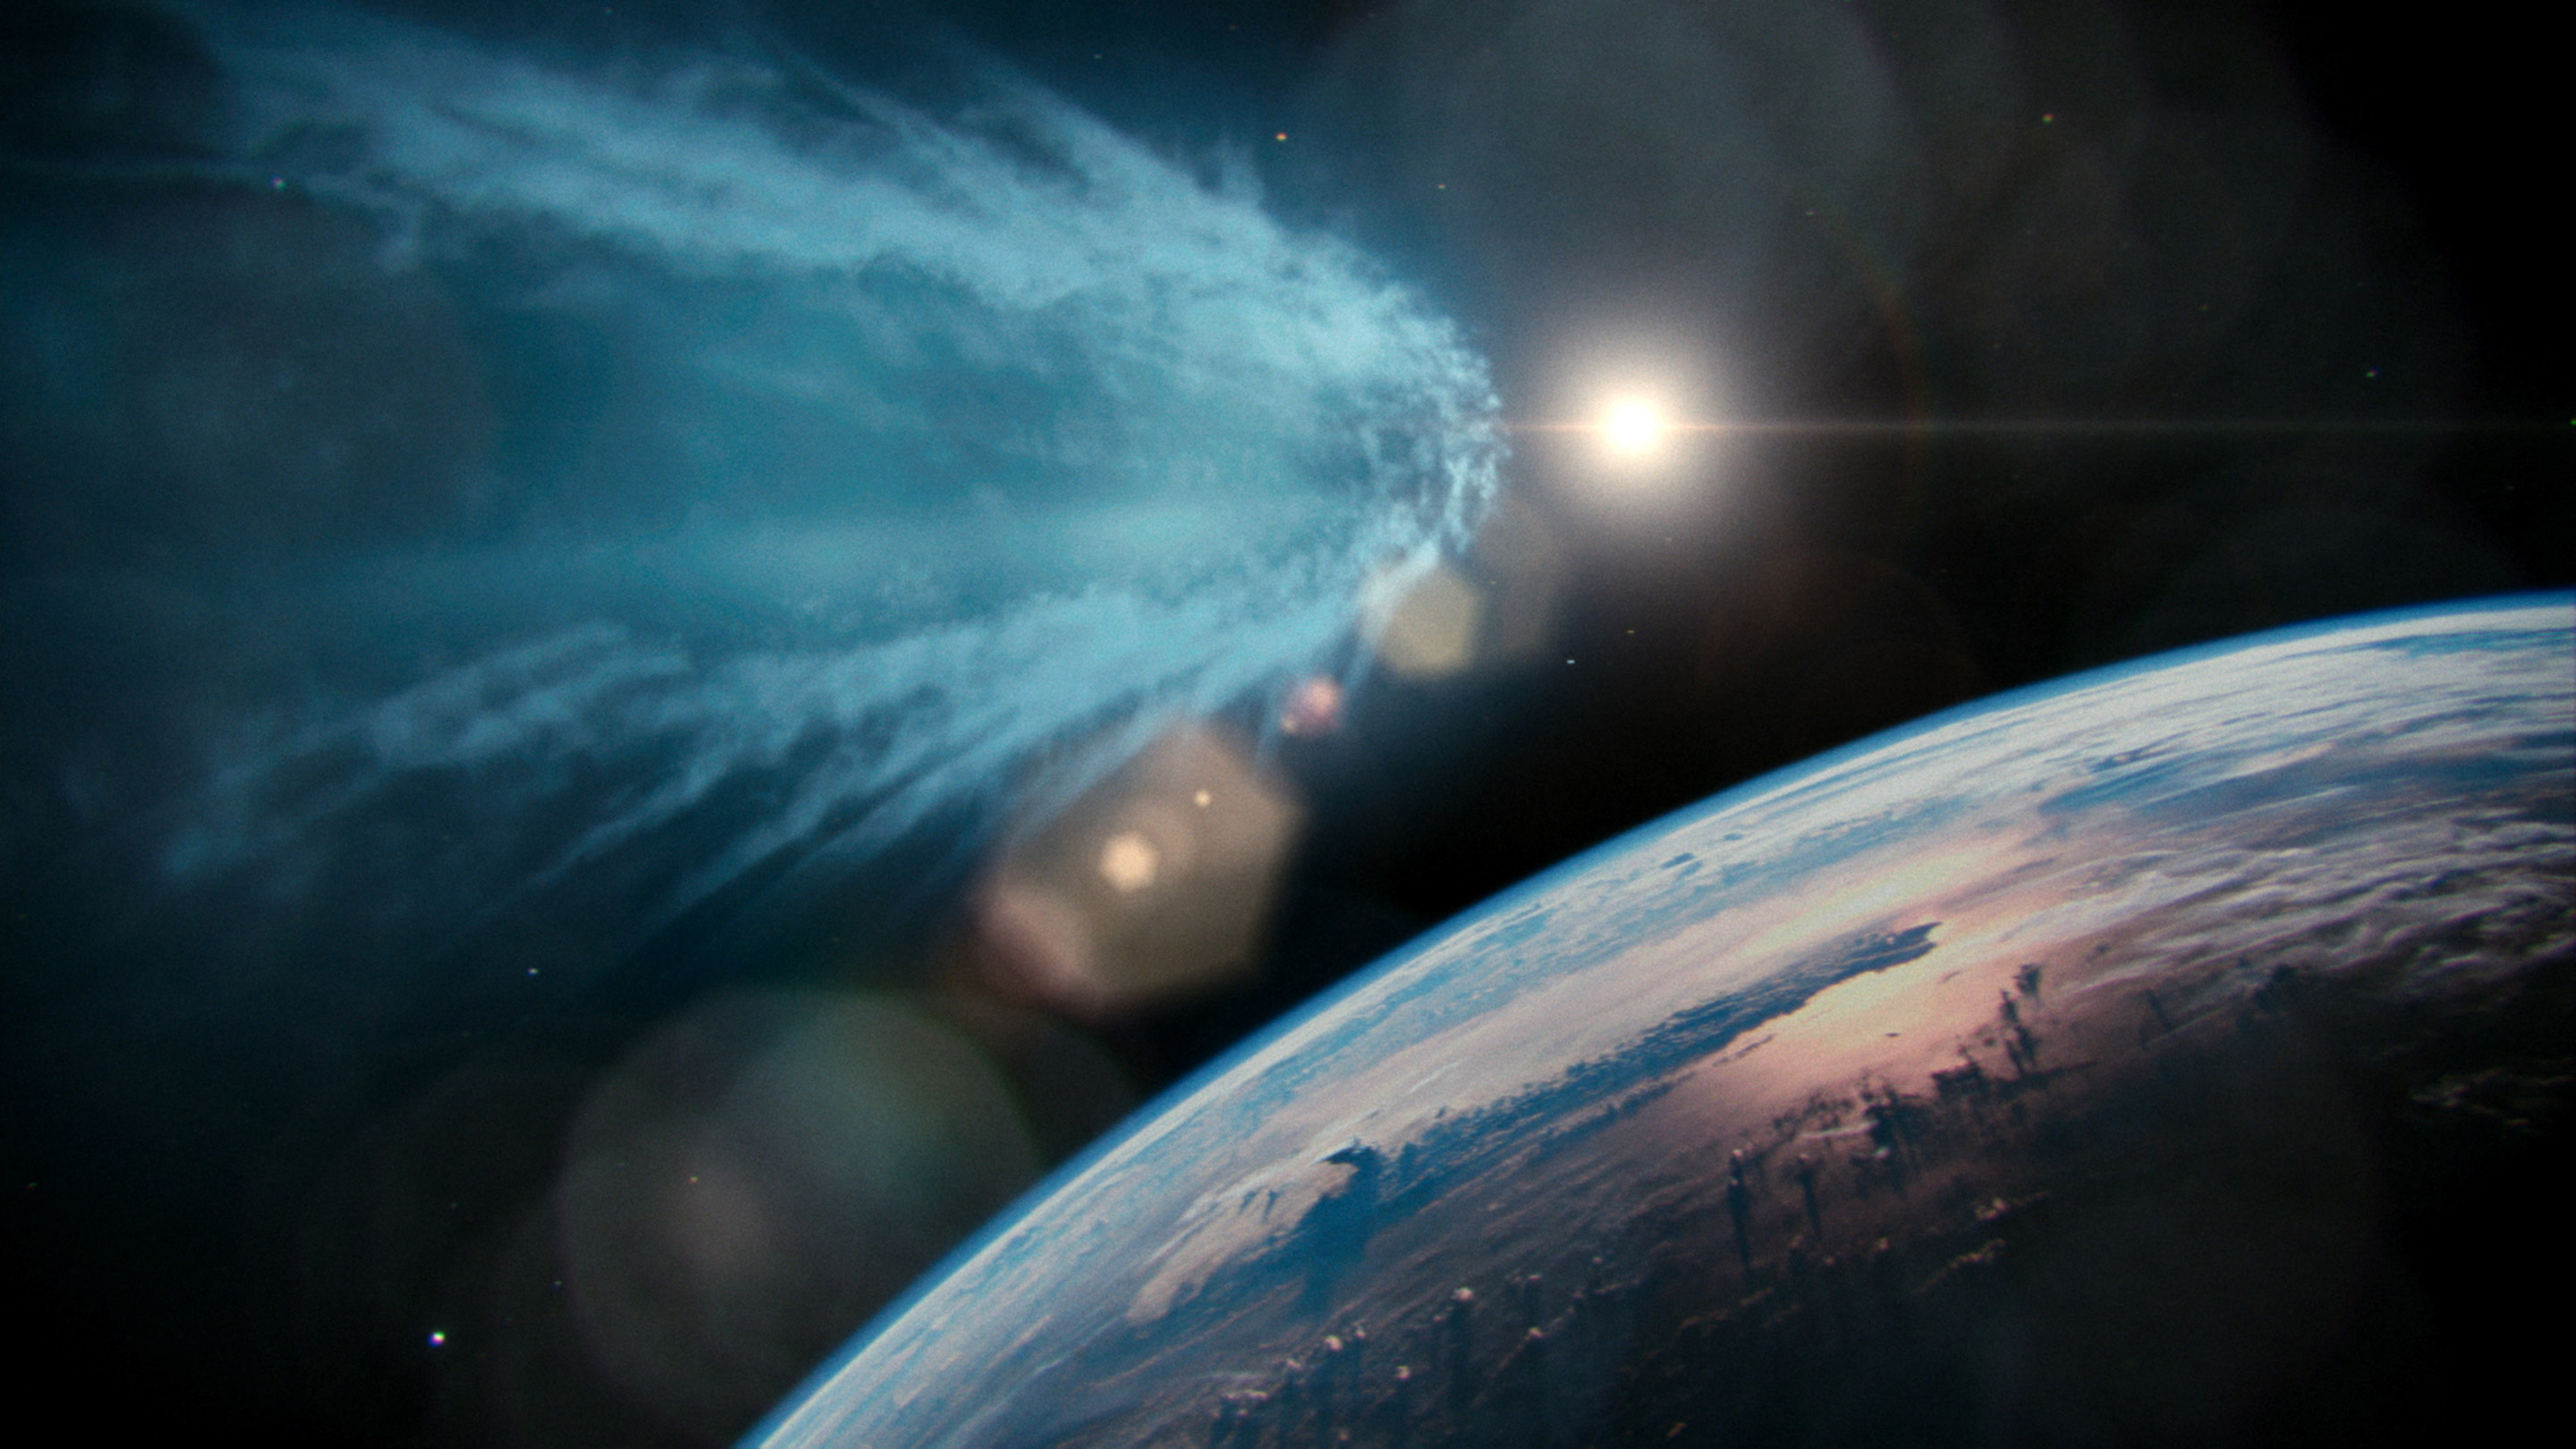 The mystery of comets is explored in the third episode. Image: Fox Broadcasting